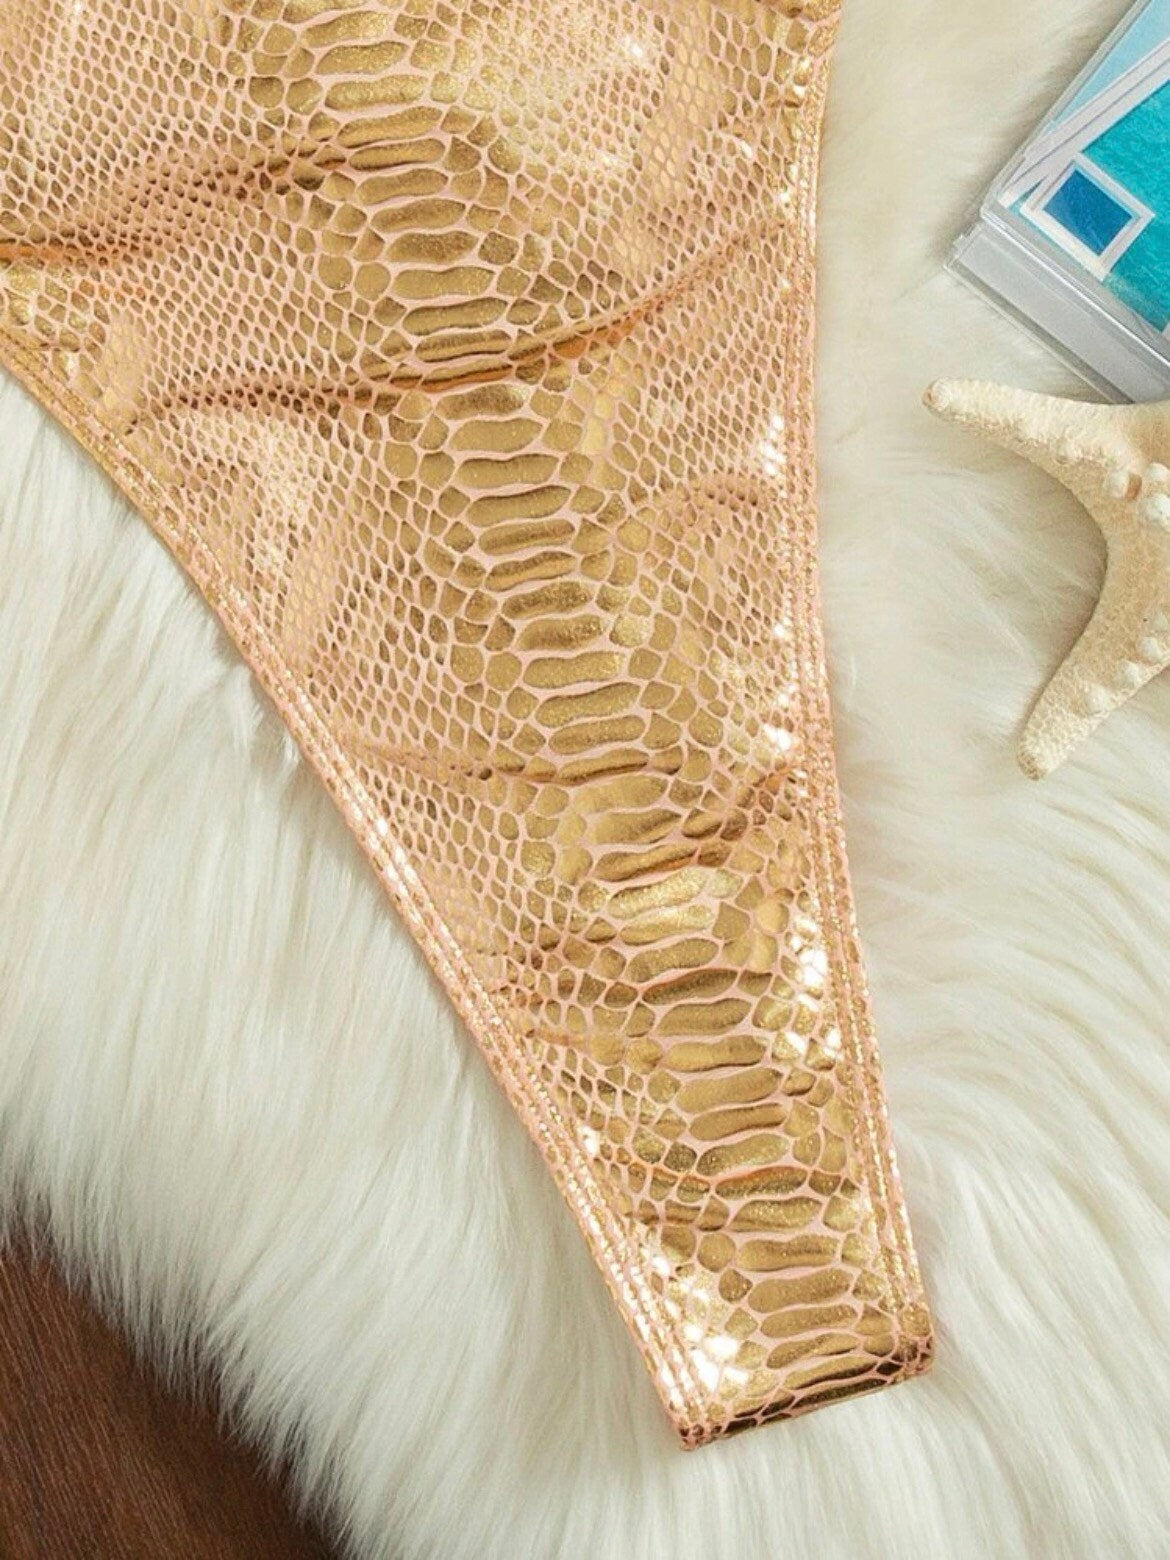 The Golden Alligator One Piece Swimsuit with a backless, high cut, sexy vibe in champagne gold